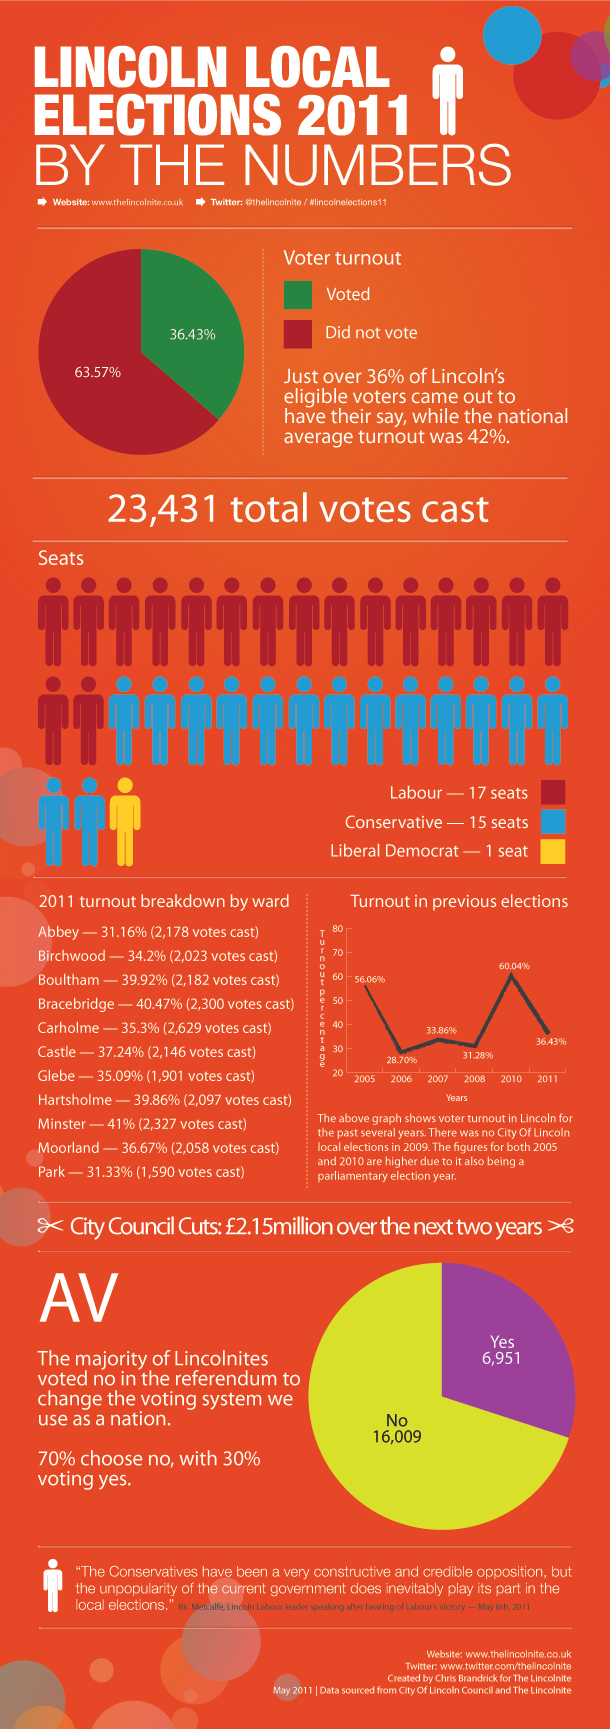 Lincoln Local Elections 2011 Infographic